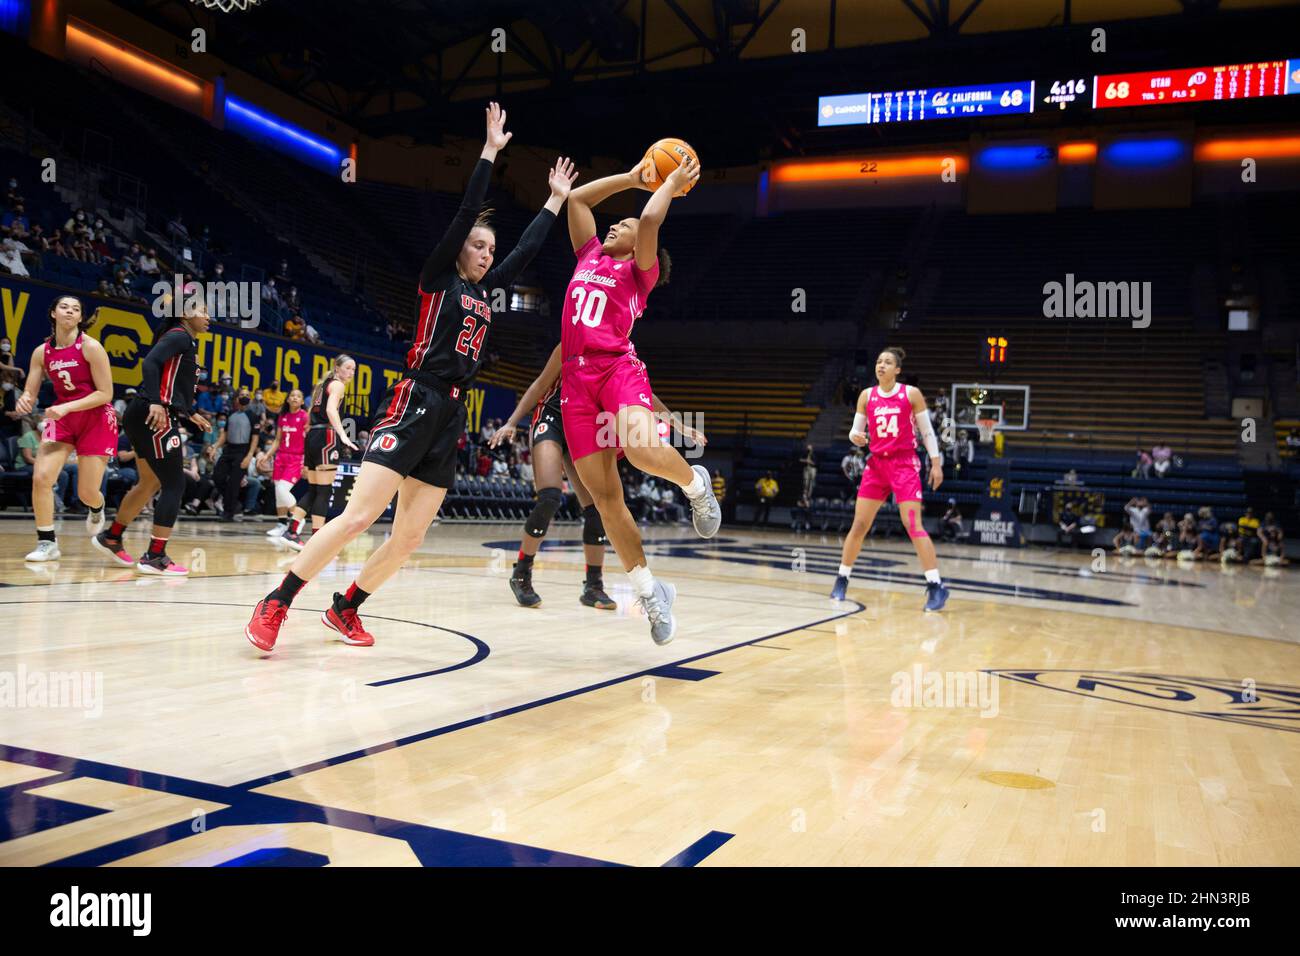 Berkeley, CA U.S. 13th Feb, 2022. A. California guard Jayda Curry (30) goes to the hoop during the NCAA Women's Basketball game between Utah Utes and the California Golden Bears. Utah beat California in overtime 80-75 at Hass Pavilion Berkeley Calif. Thurman James/CSM/Alamy Live News Stock Photo